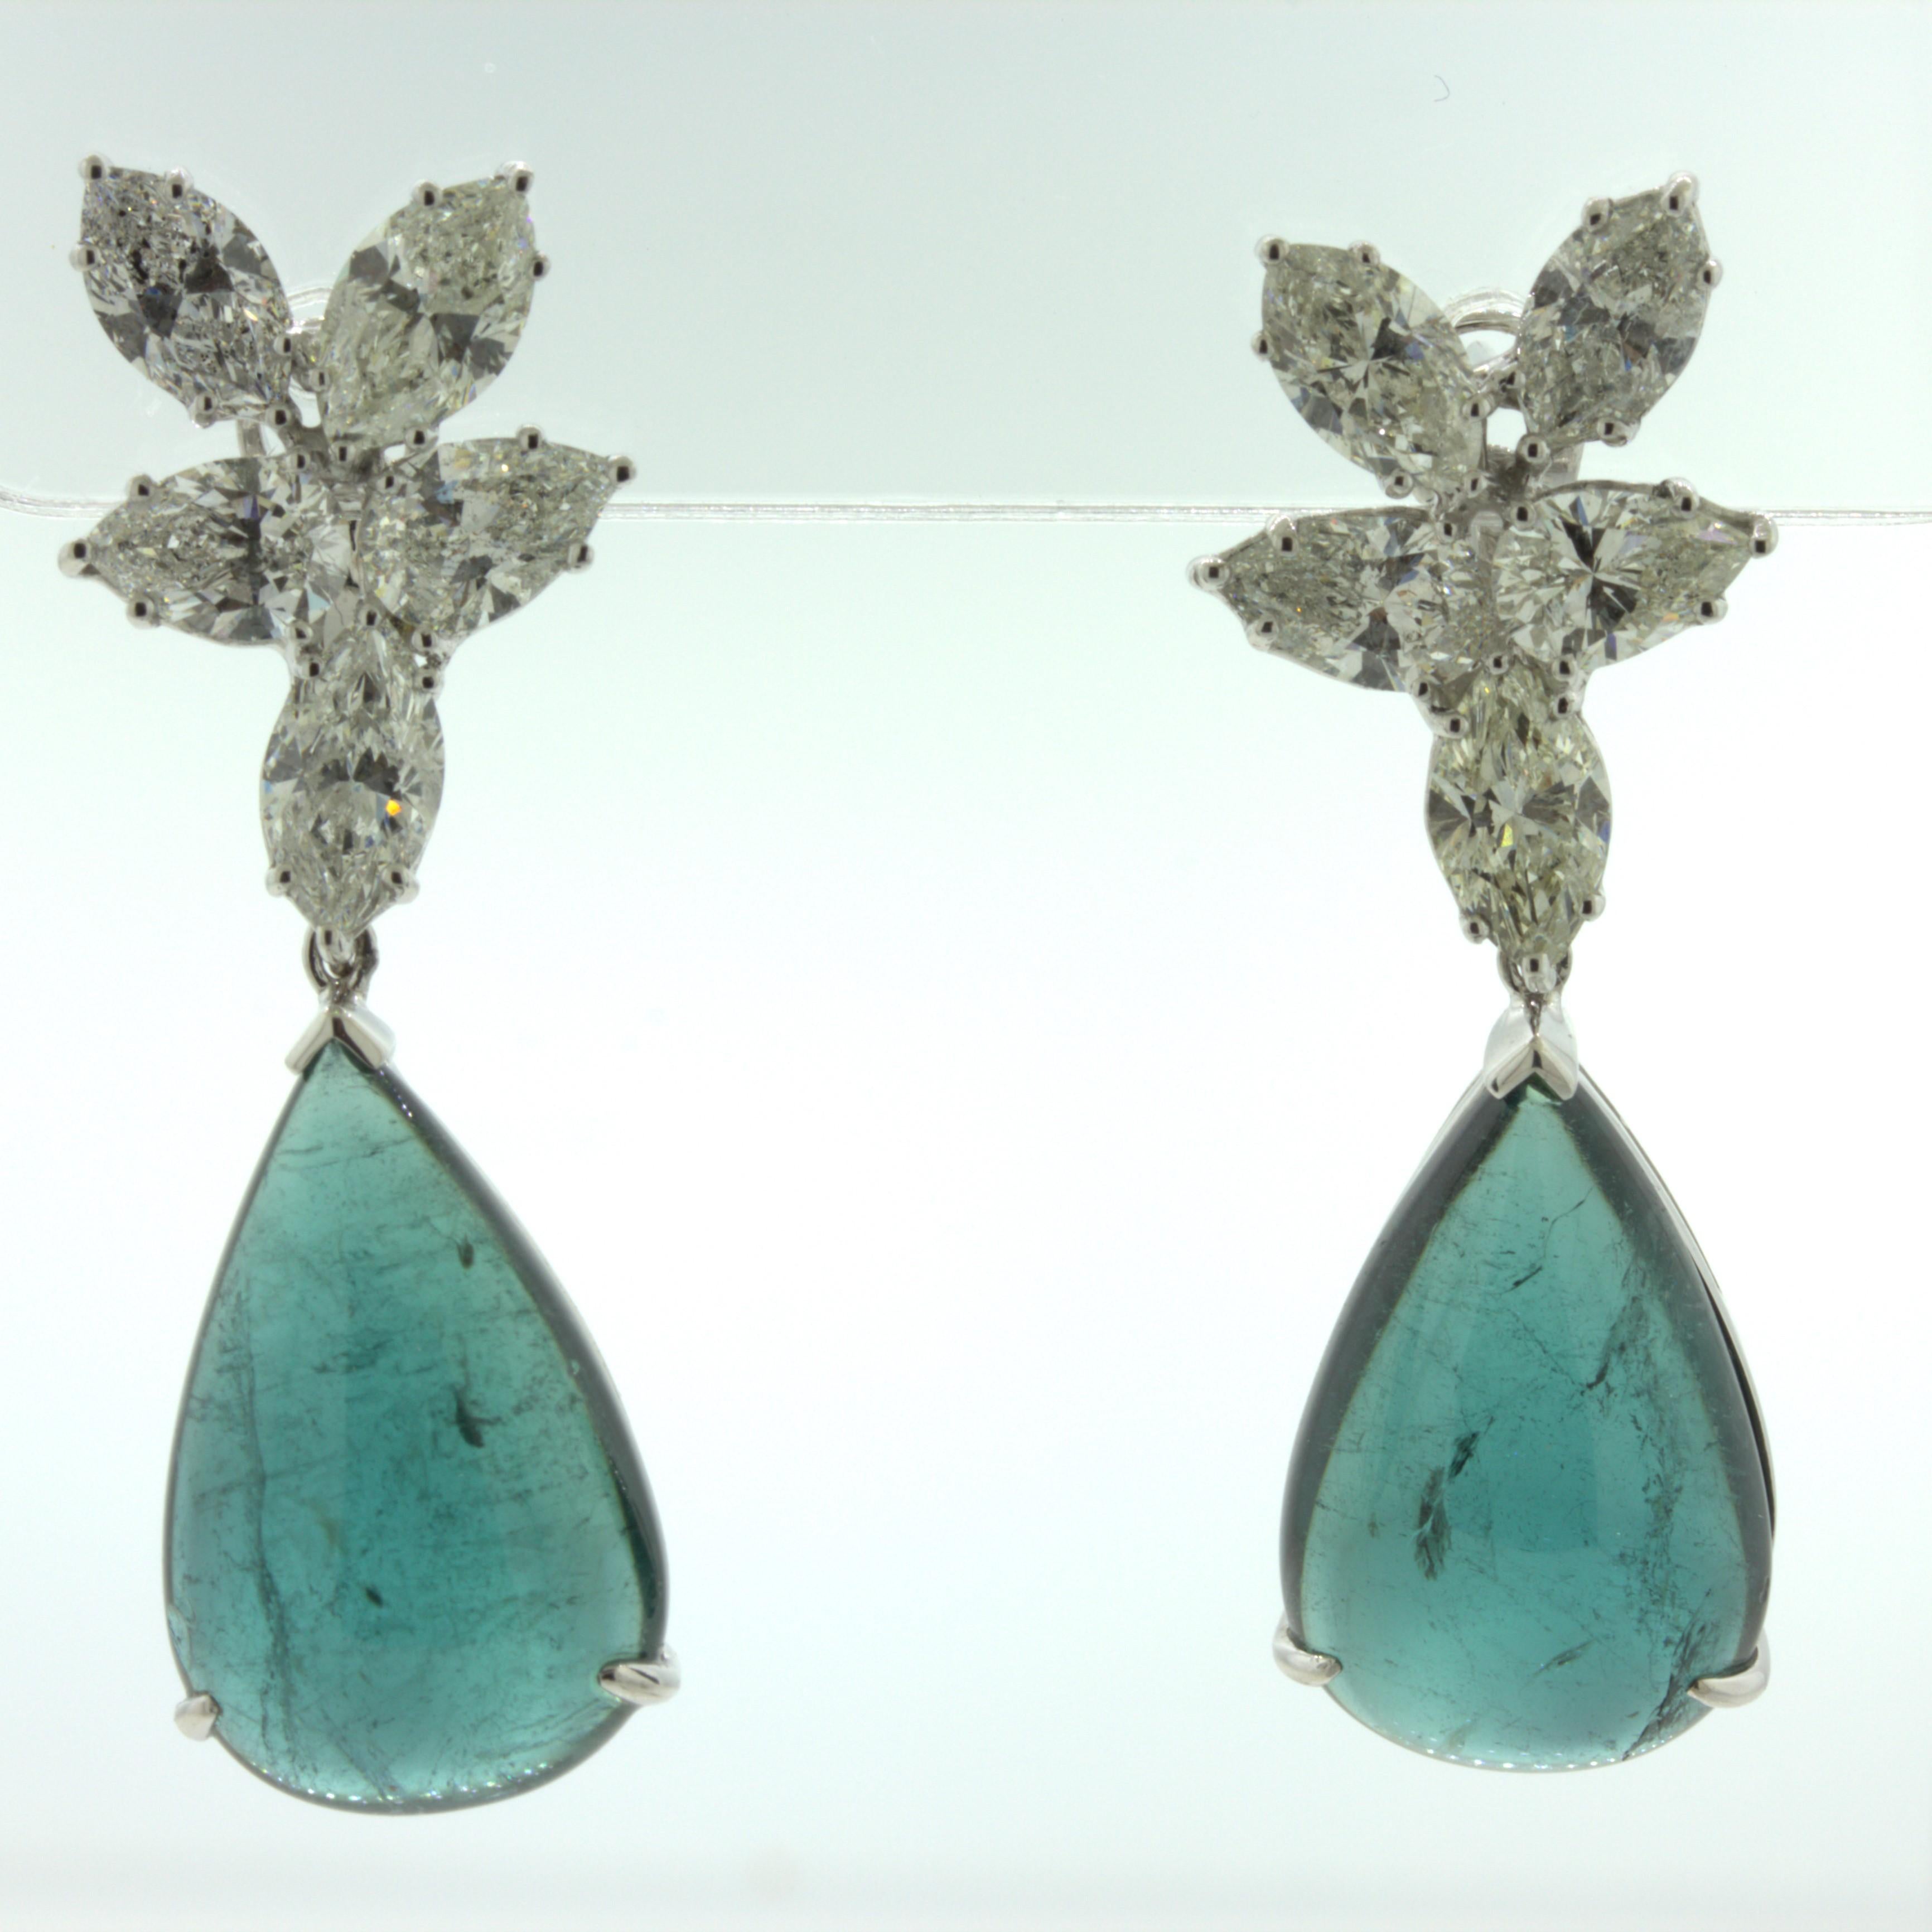 An elegant pair of drop earrings featuring 2 pear-shape cabochon indicolite tourmaline weighing 25.60 carats total. They have a rich blue-green color and are perfectly matching in size, shape and color. They are accented by clusters of very large